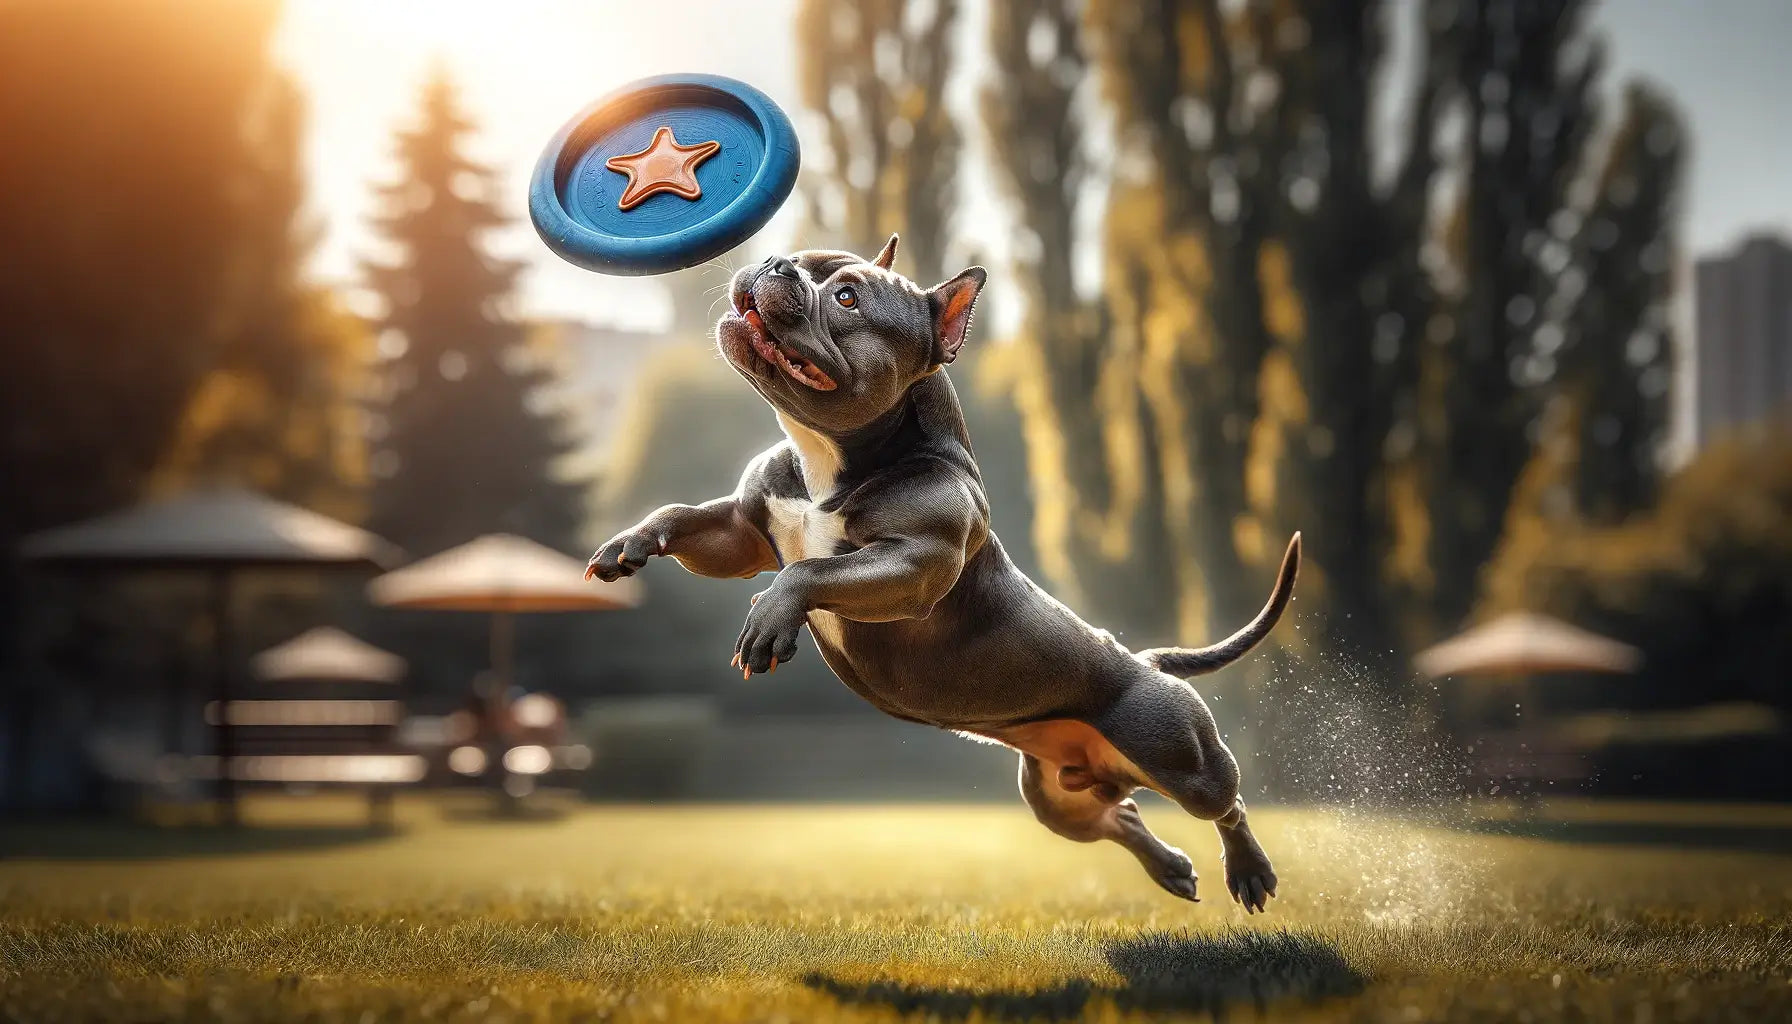 An action shot of a Pocket Bully catching a frisbee, displaying its agility and playful nature